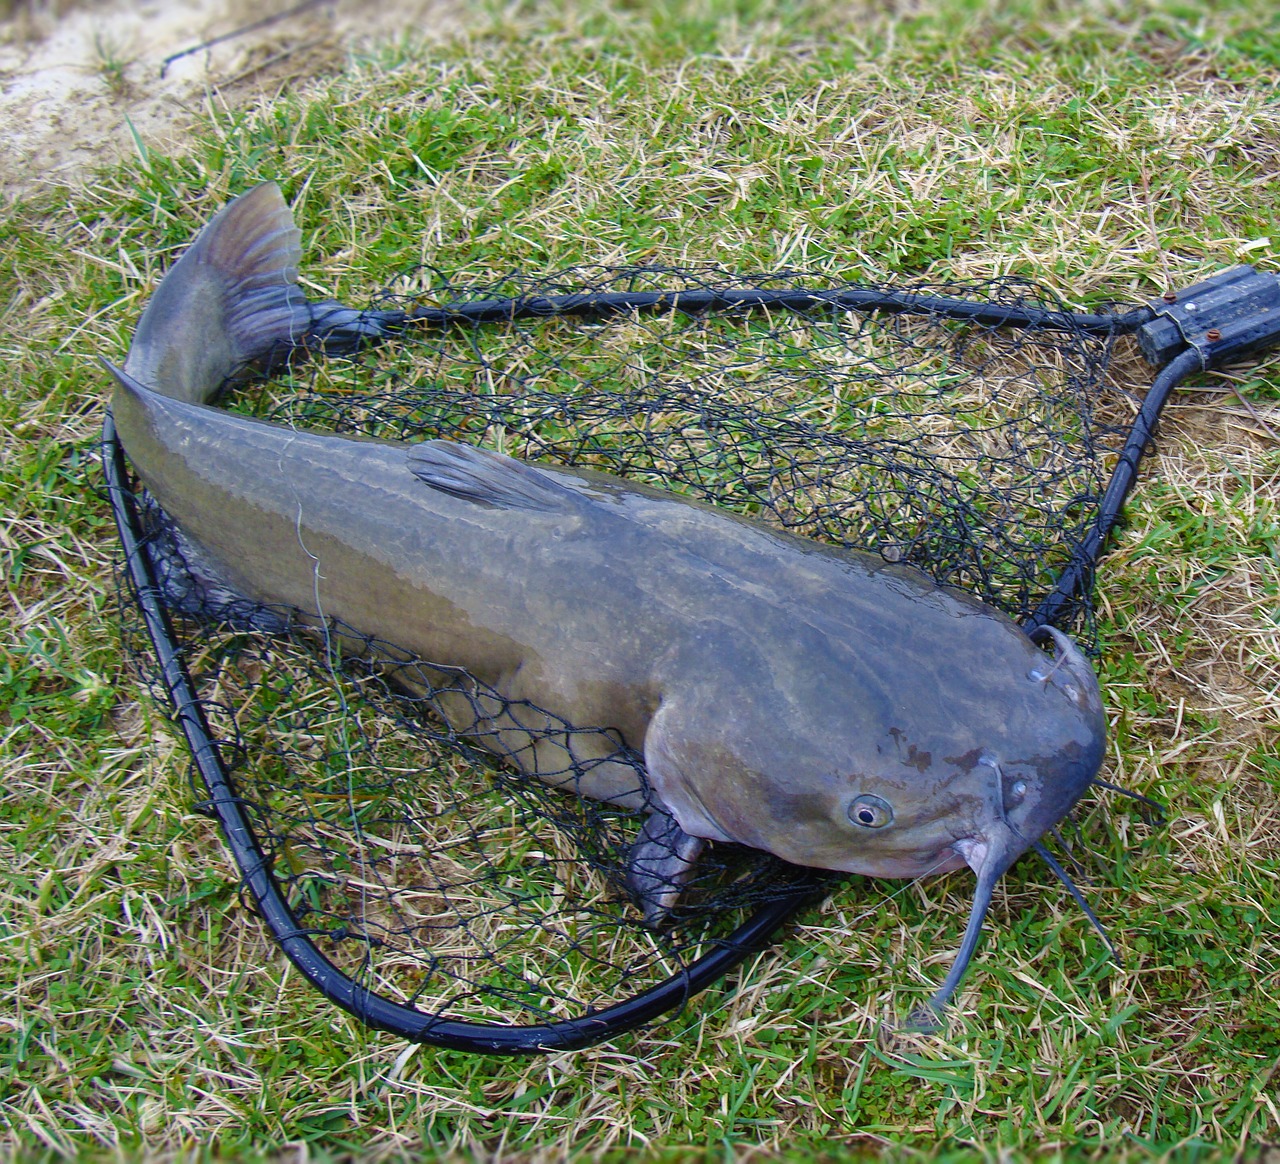 Mummified Catfish Has Been Resuscitated With a Splash of Water as